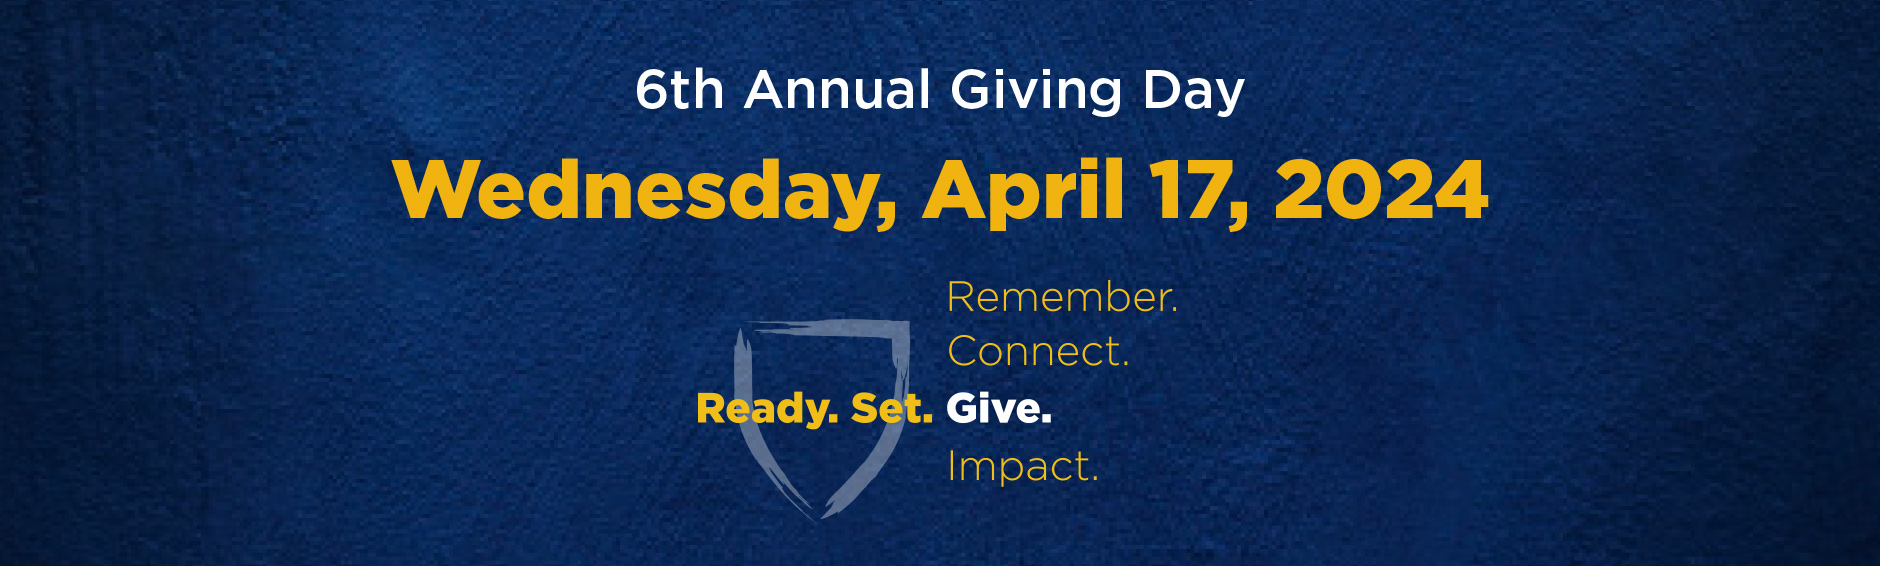 6th Annual Giving Day, Wednesday, April 17, 2024. Ready. Set. Connect Remember. Impact. Give.